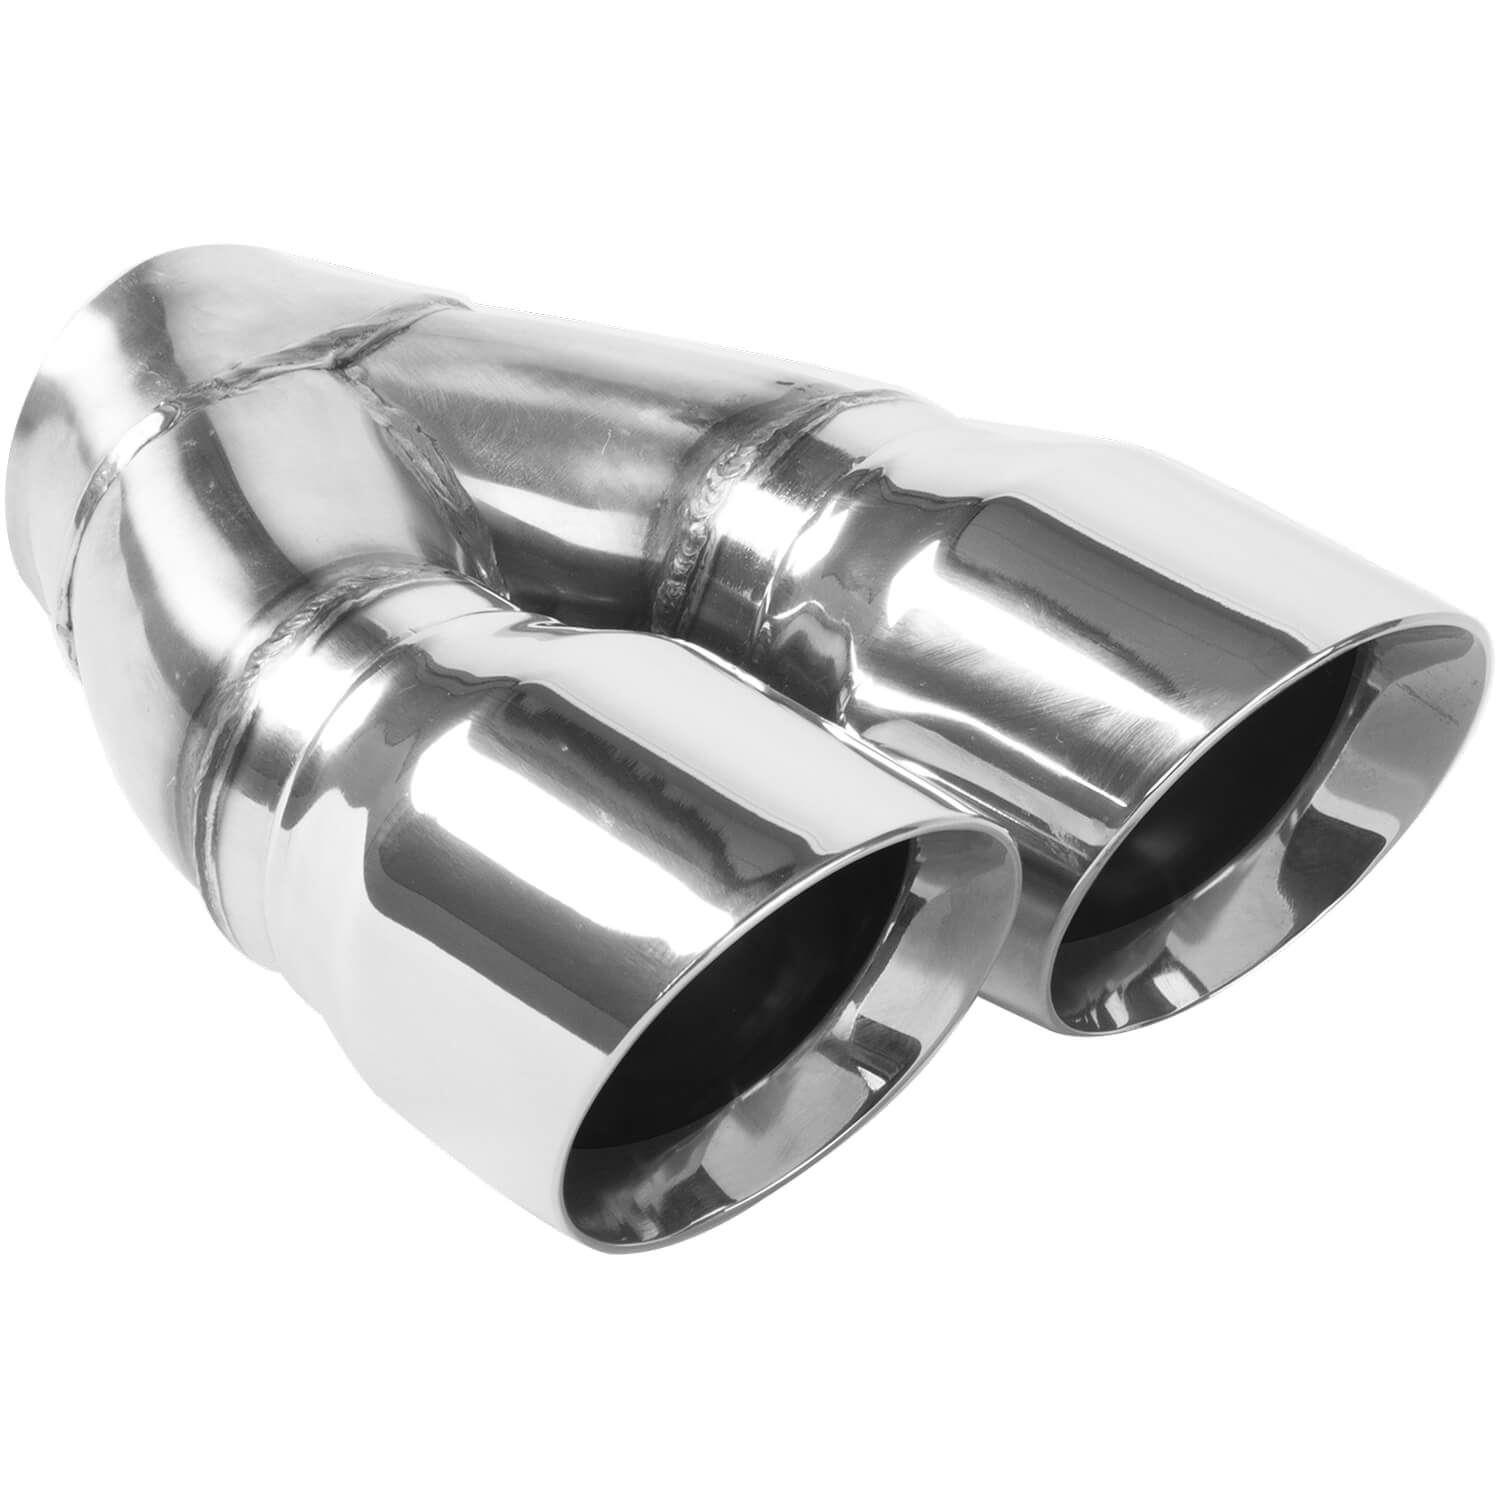 Polished Stainless Steel Weld-On Dual Exhaust Tip Inlet Inside Diameter: 2.25"